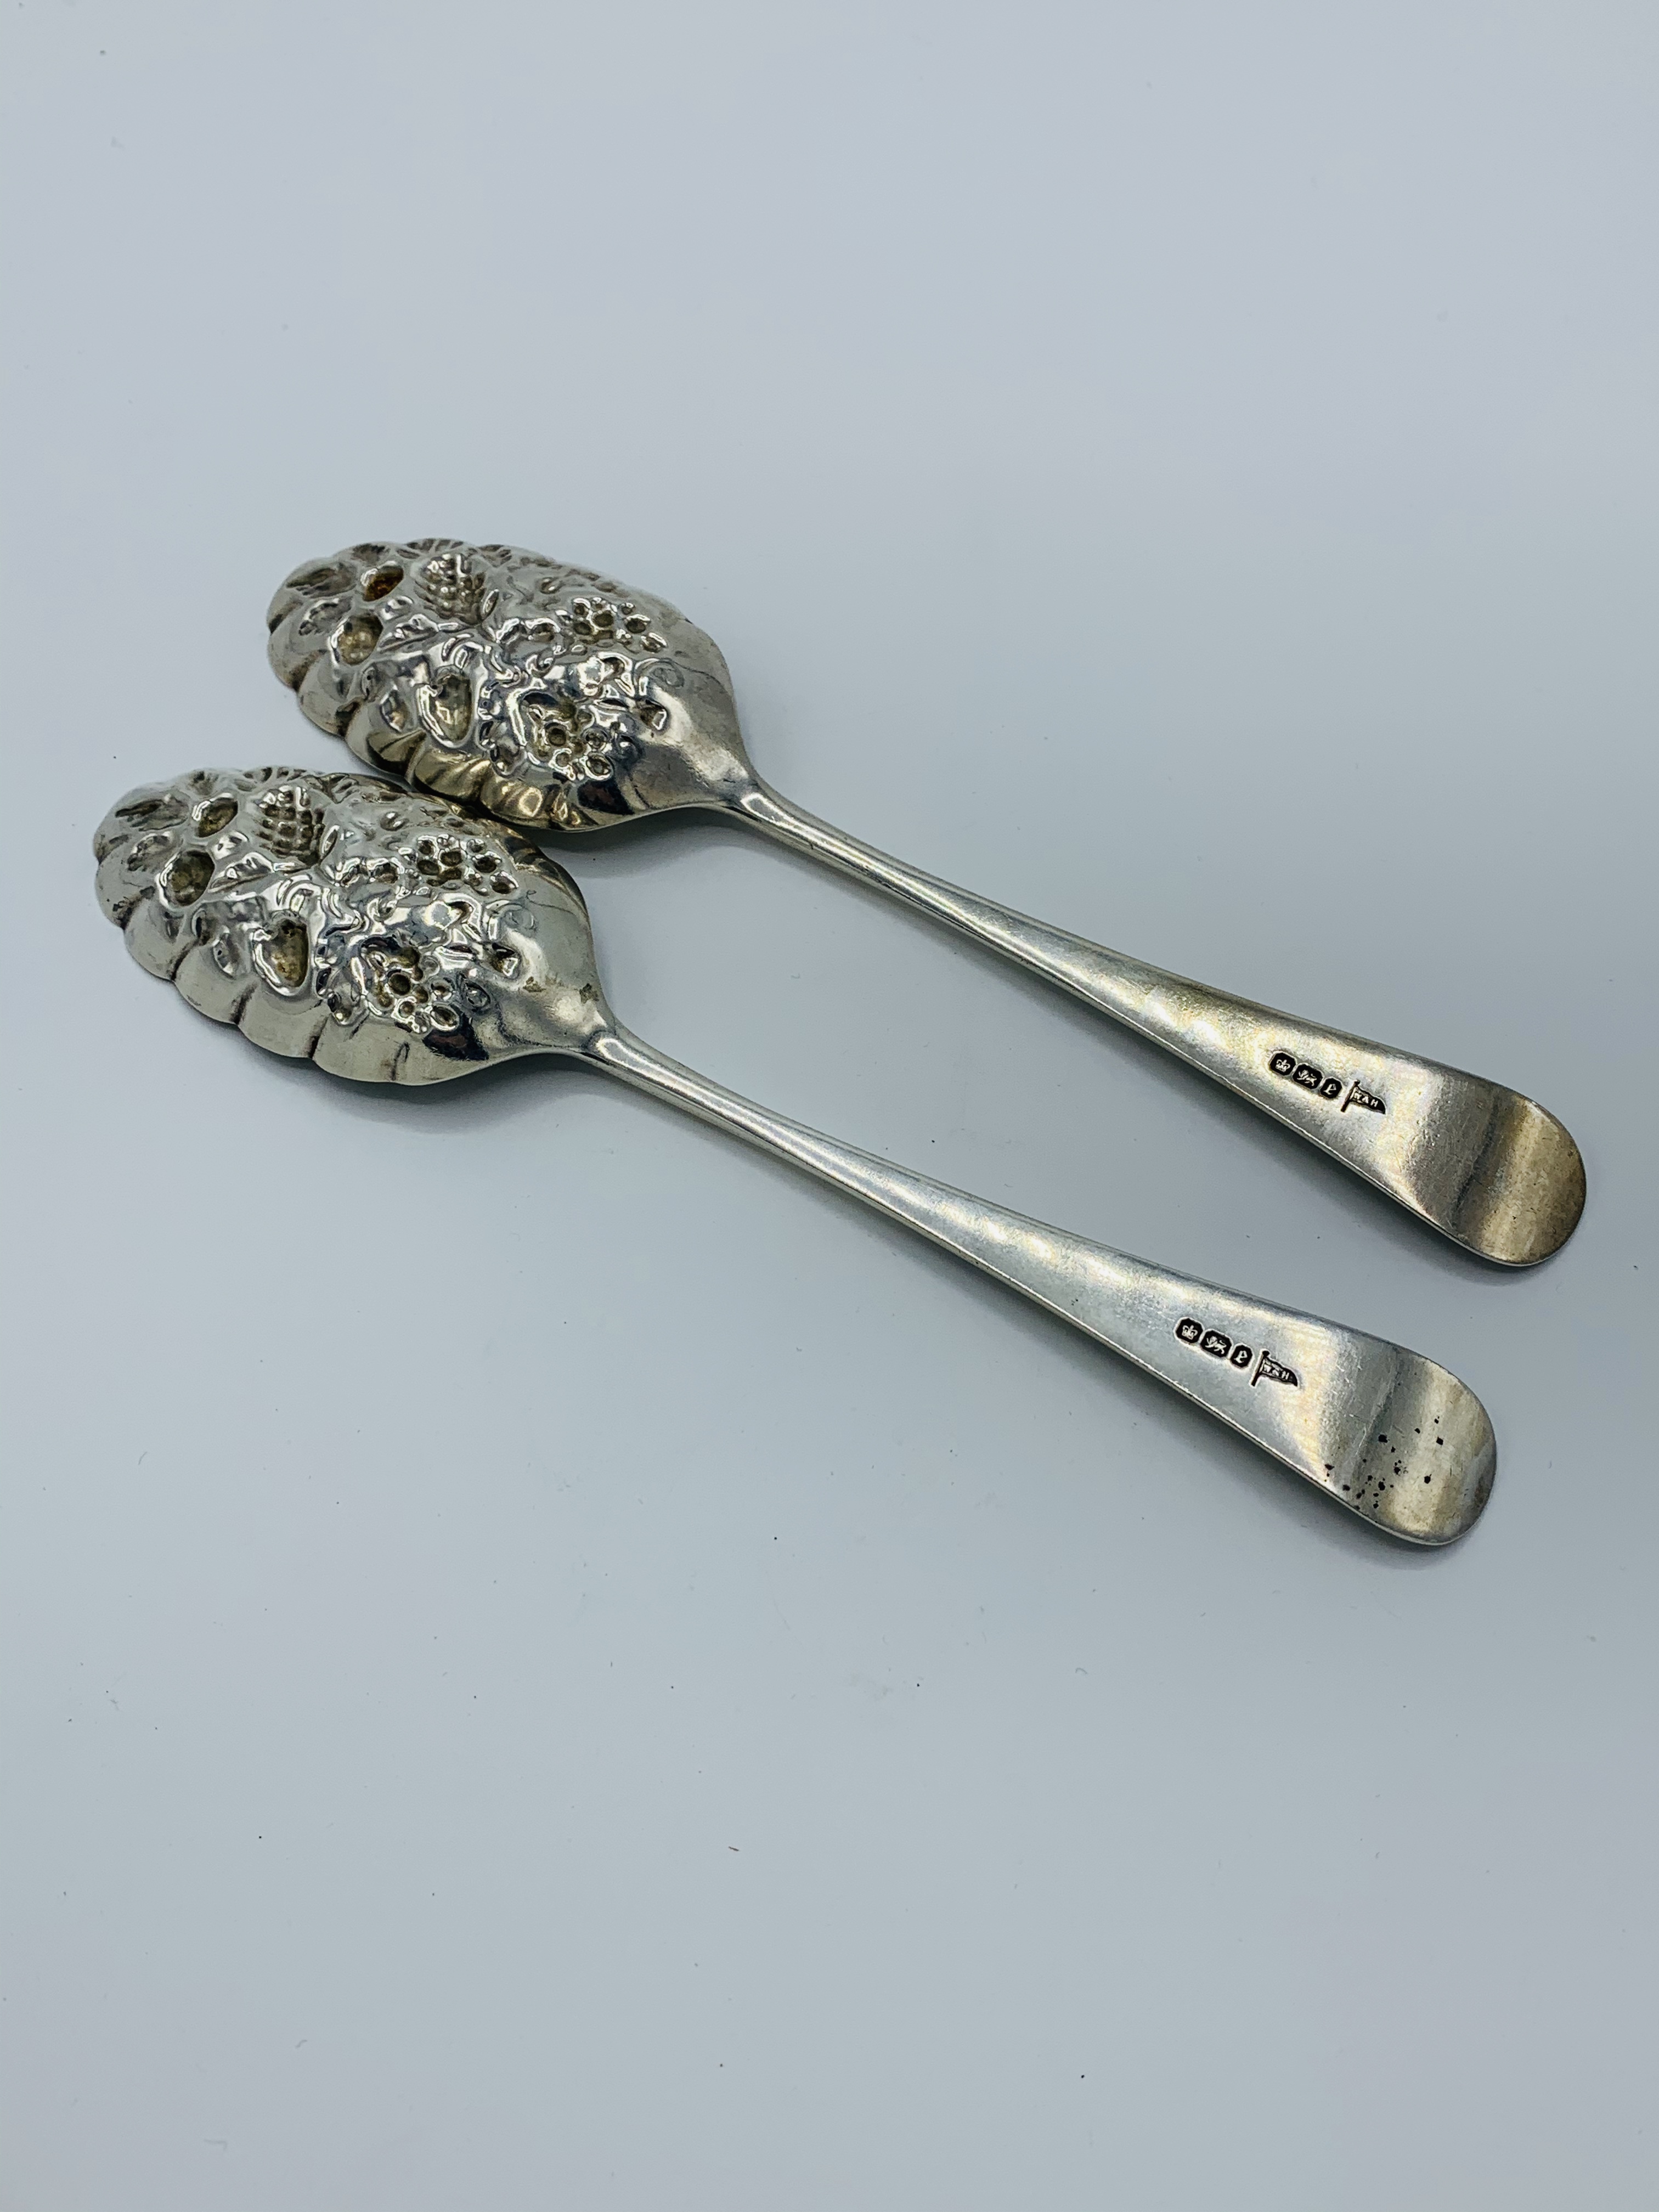 2 silver berry spoons by Walker & Hall. - Image 3 of 3